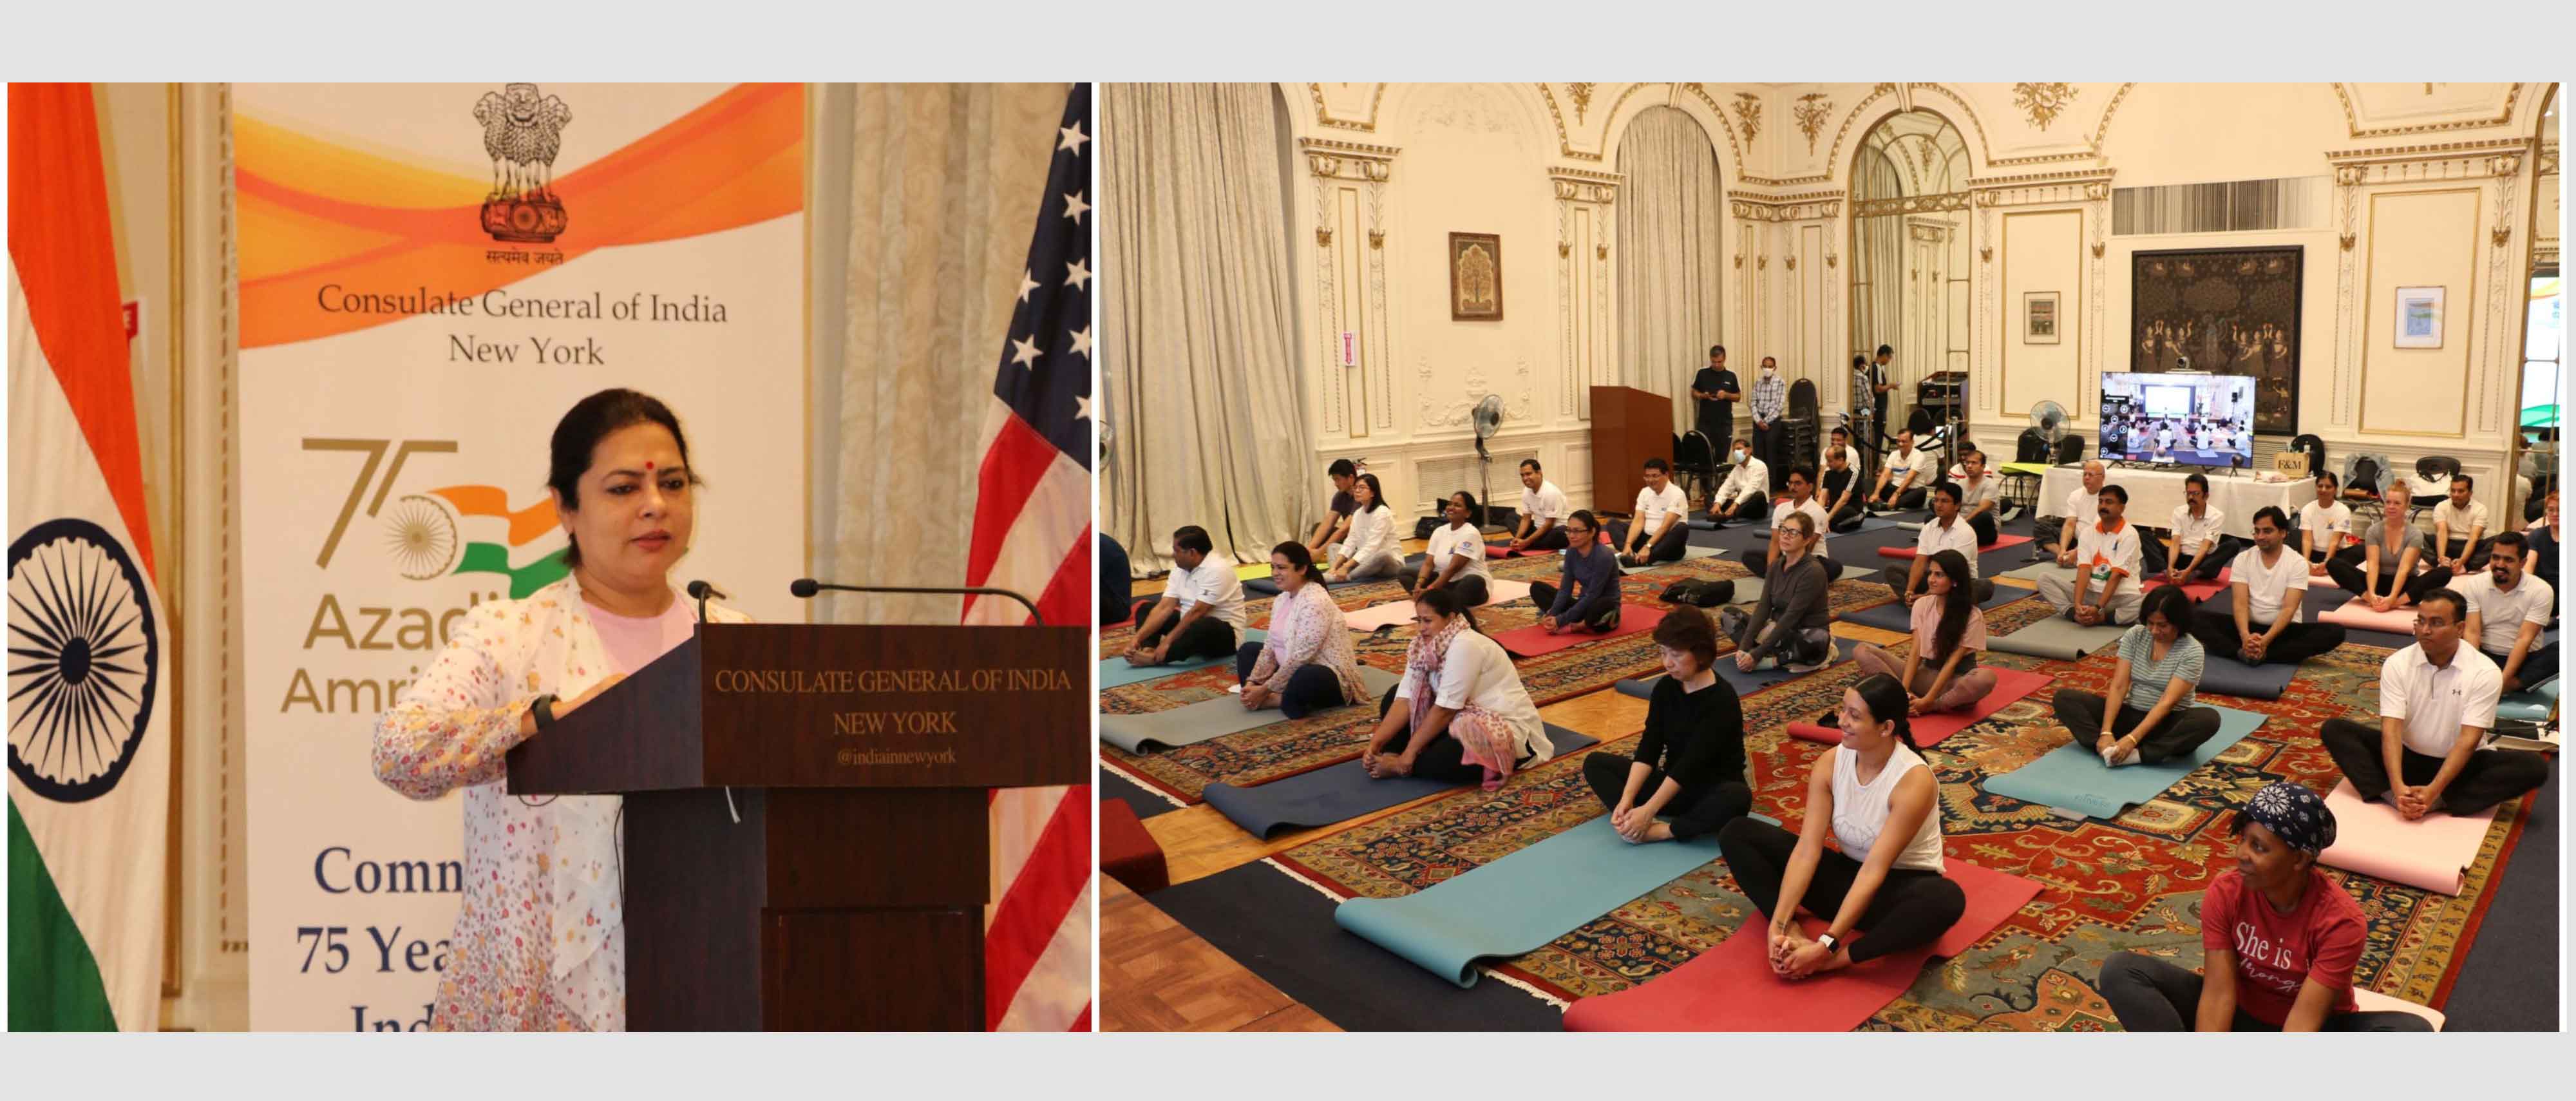  Hon'ble Minister of State for External Affairs & Culture Smt. Meenakashi Lekhi participated in a Yoga session at the Consulate